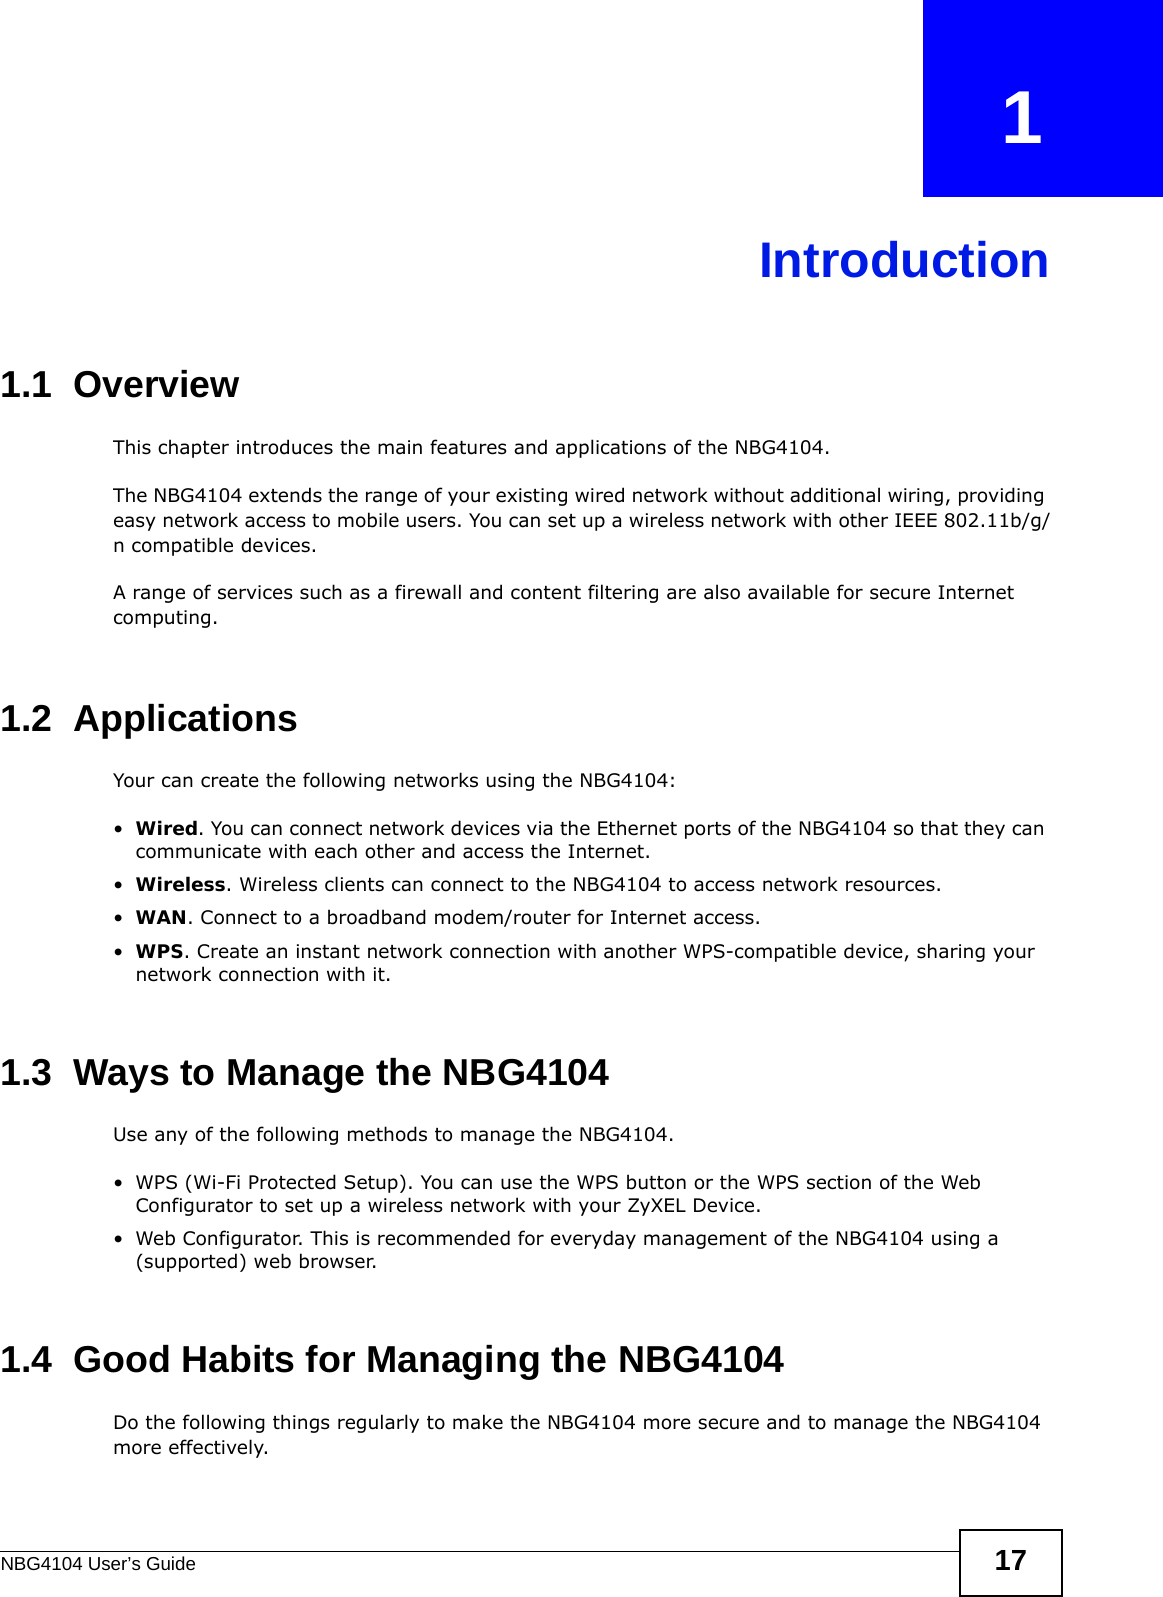 NBG4104 User’s Guide 17CHAPTER   1Introduction1.1  OverviewThis chapter introduces the main features and applications of the NBG4104.The NBG4104 extends the range of your existing wired network without additional wiring, providing easy network access to mobile users. You can set up a wireless network with other IEEE 802.11b/g/n compatible devices.A range of services such as a firewall and content filtering are also available for secure Internet computing. 1.2  ApplicationsYour can create the following networks using the NBG4104:•Wired. You can connect network devices via the Ethernet ports of the NBG4104 so that they can communicate with each other and access the Internet.•Wireless. Wireless clients can connect to the NBG4104 to access network resources.•WAN. Connect to a broadband modem/router for Internet access.•WPS. Create an instant network connection with another WPS-compatible device, sharing your network connection with it.1.3  Ways to Manage the NBG4104Use any of the following methods to manage the NBG4104.• WPS (Wi-Fi Protected Setup). You can use the WPS button or the WPS section of the Web Configurator to set up a wireless network with your ZyXEL Device.• Web Configurator. This is recommended for everyday management of the NBG4104 using a (supported) web browser.1.4  Good Habits for Managing the NBG4104Do the following things regularly to make the NBG4104 more secure and to manage the NBG4104 more effectively.